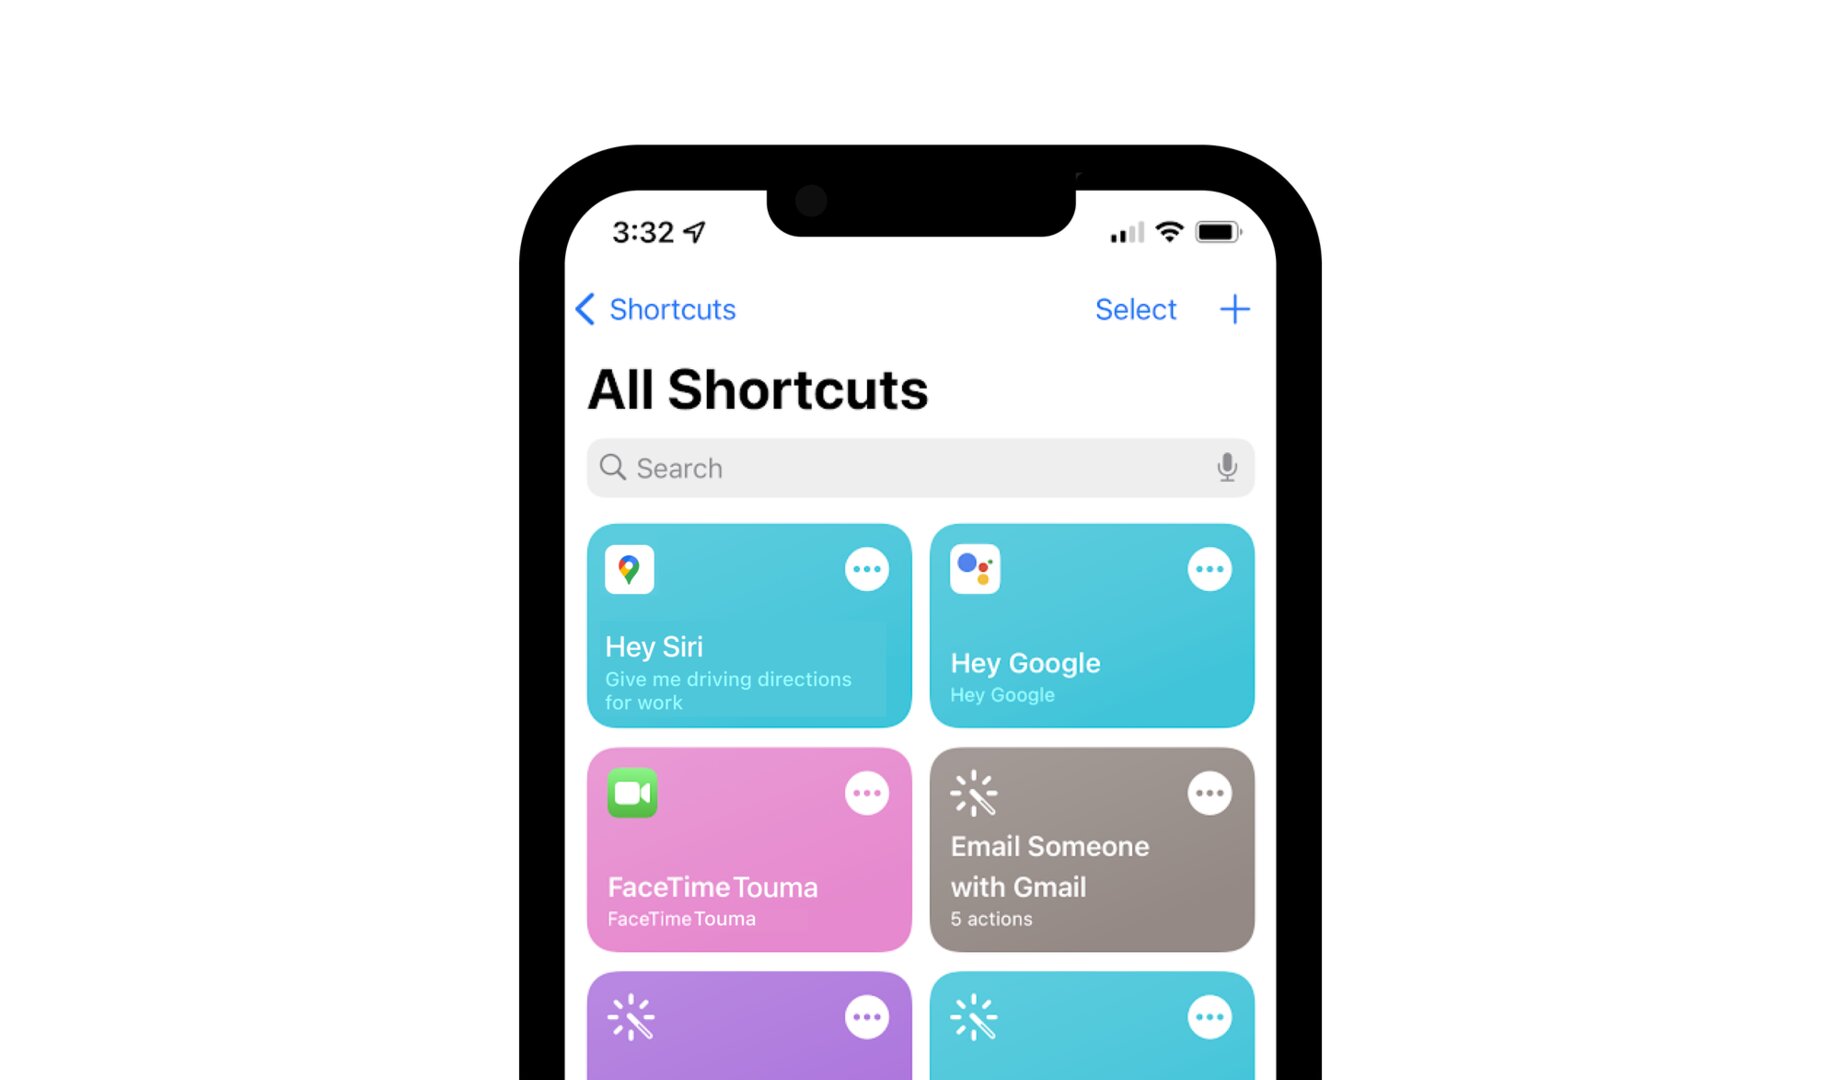 Tiefere Integration in Shortcuts